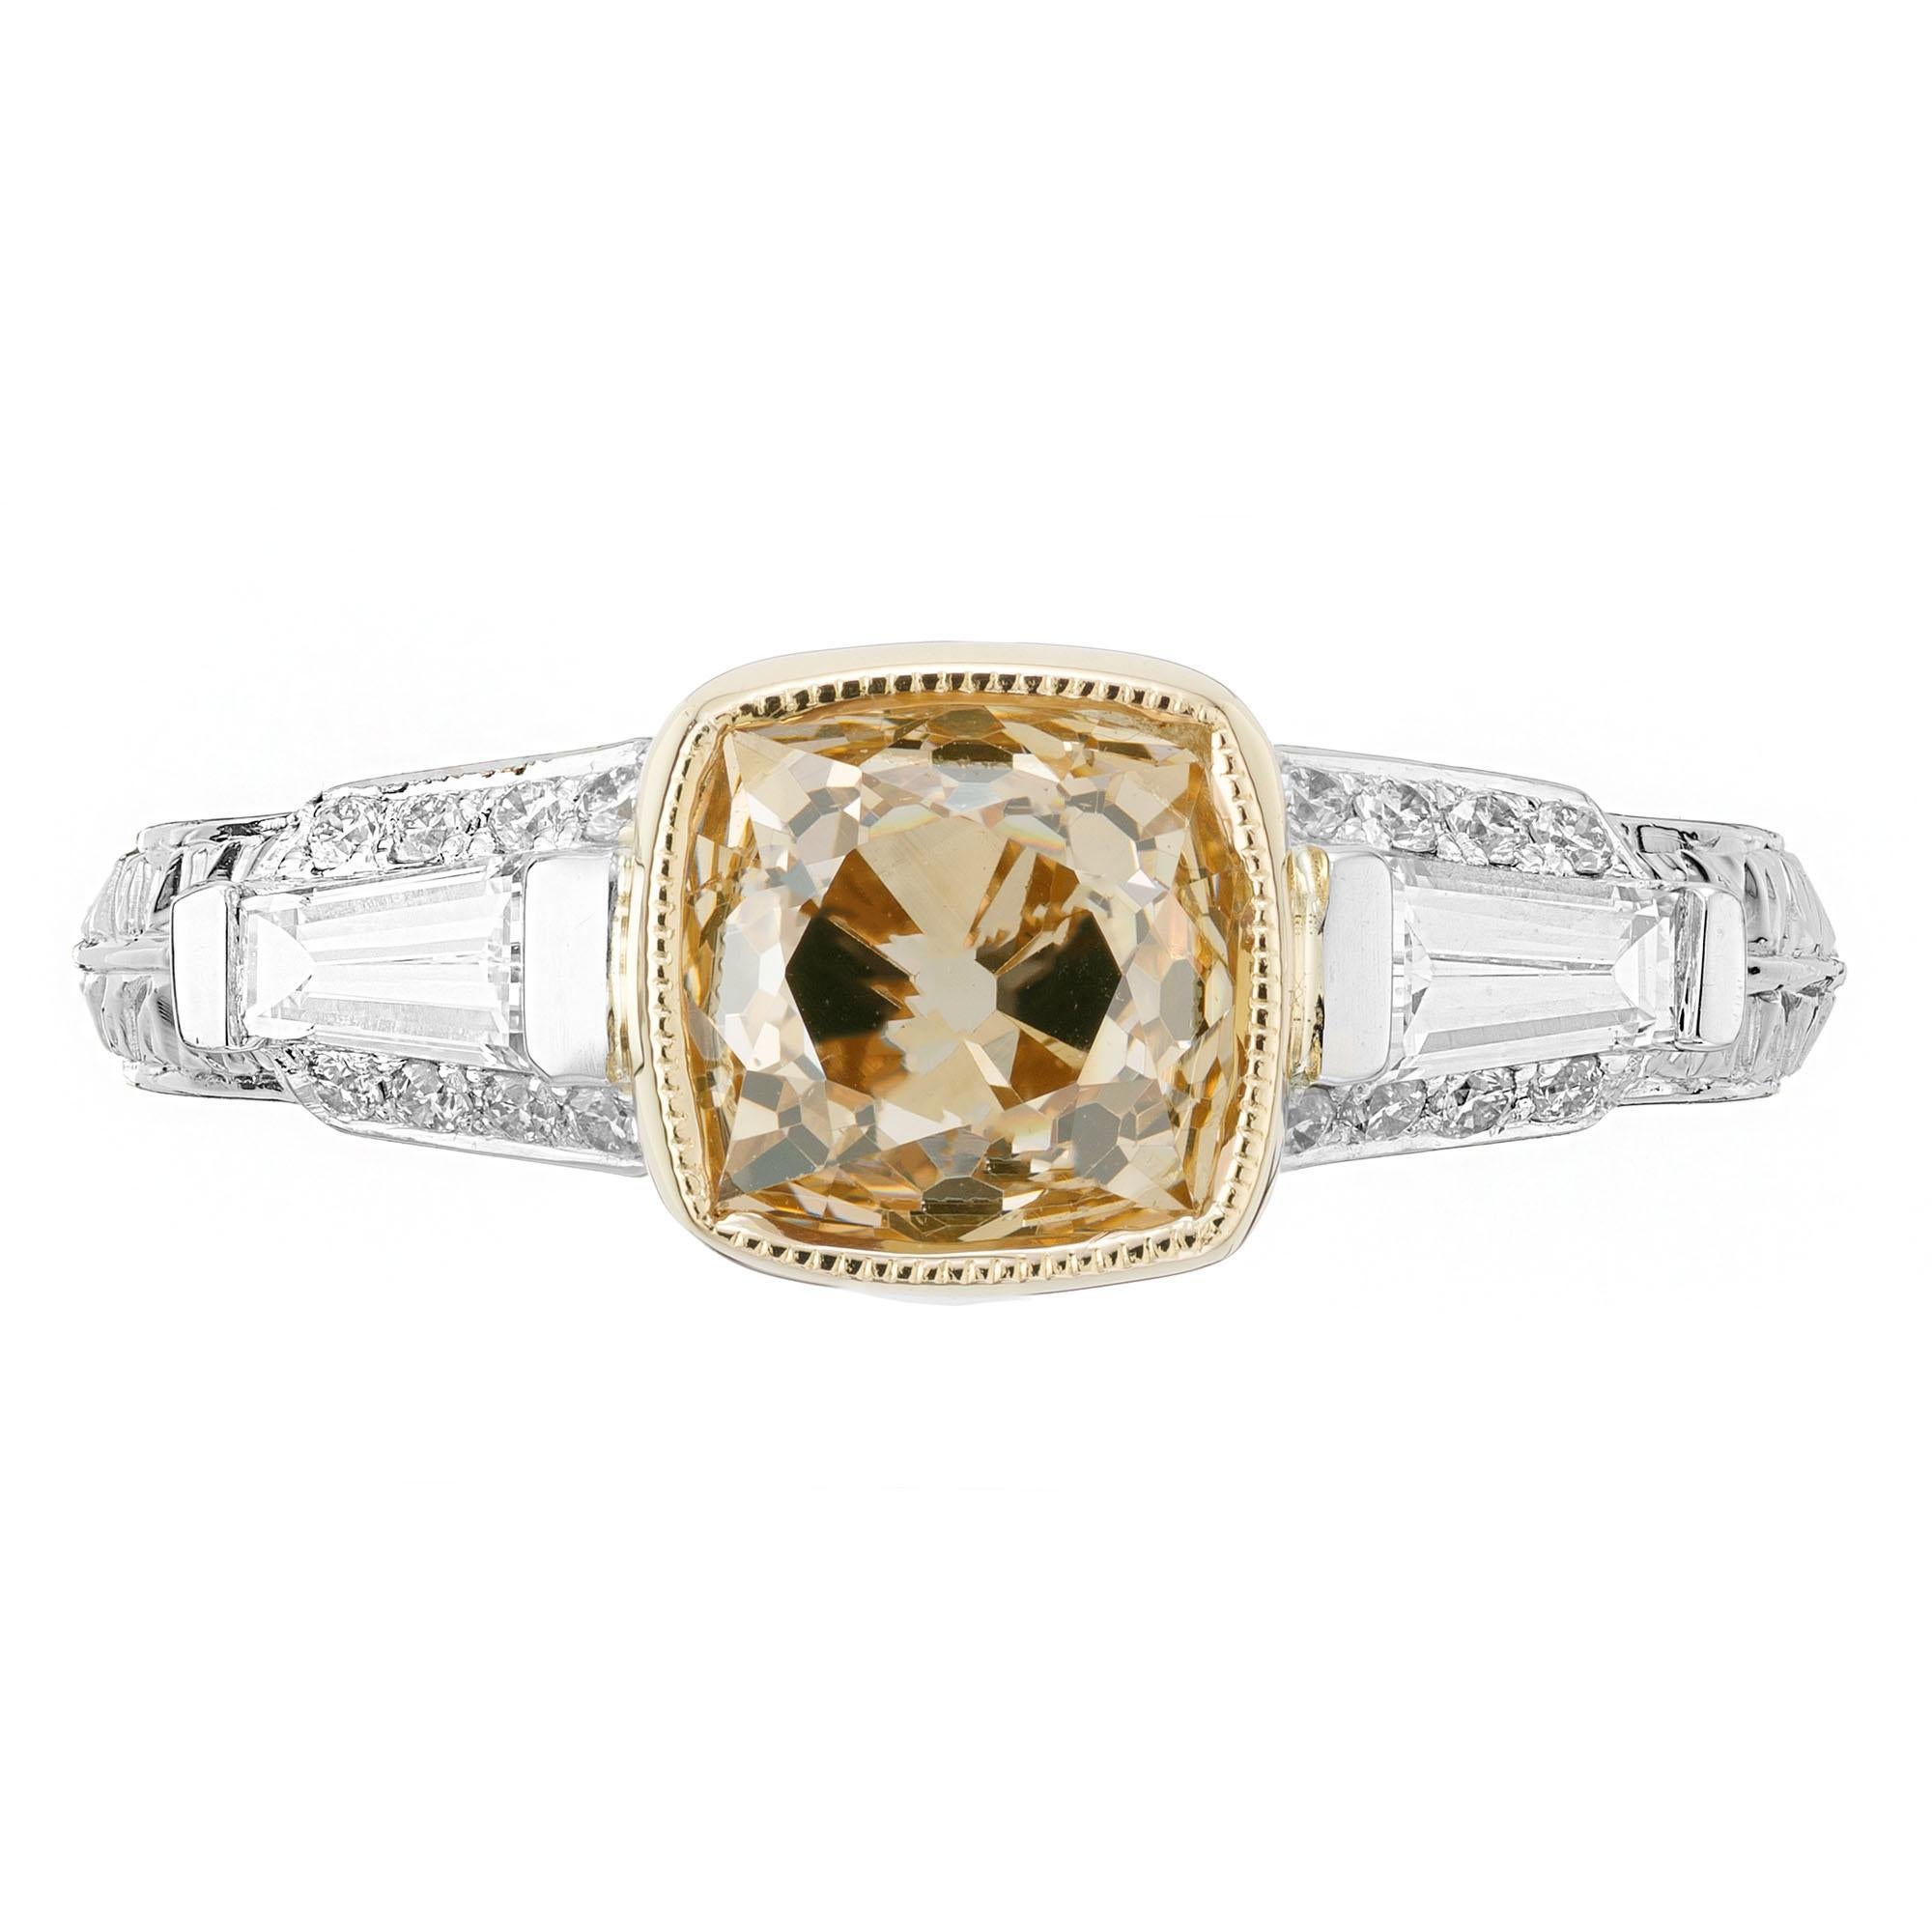 Brown and yellow diamond engagement ring. Antique cushion cut natural fancy brownish yellow bezel set center stone, with 2 tapered baguette side diamonds. 16 round accent diamonds. Handmade three-stone Platinum setting with an 18k yellow gold crown.